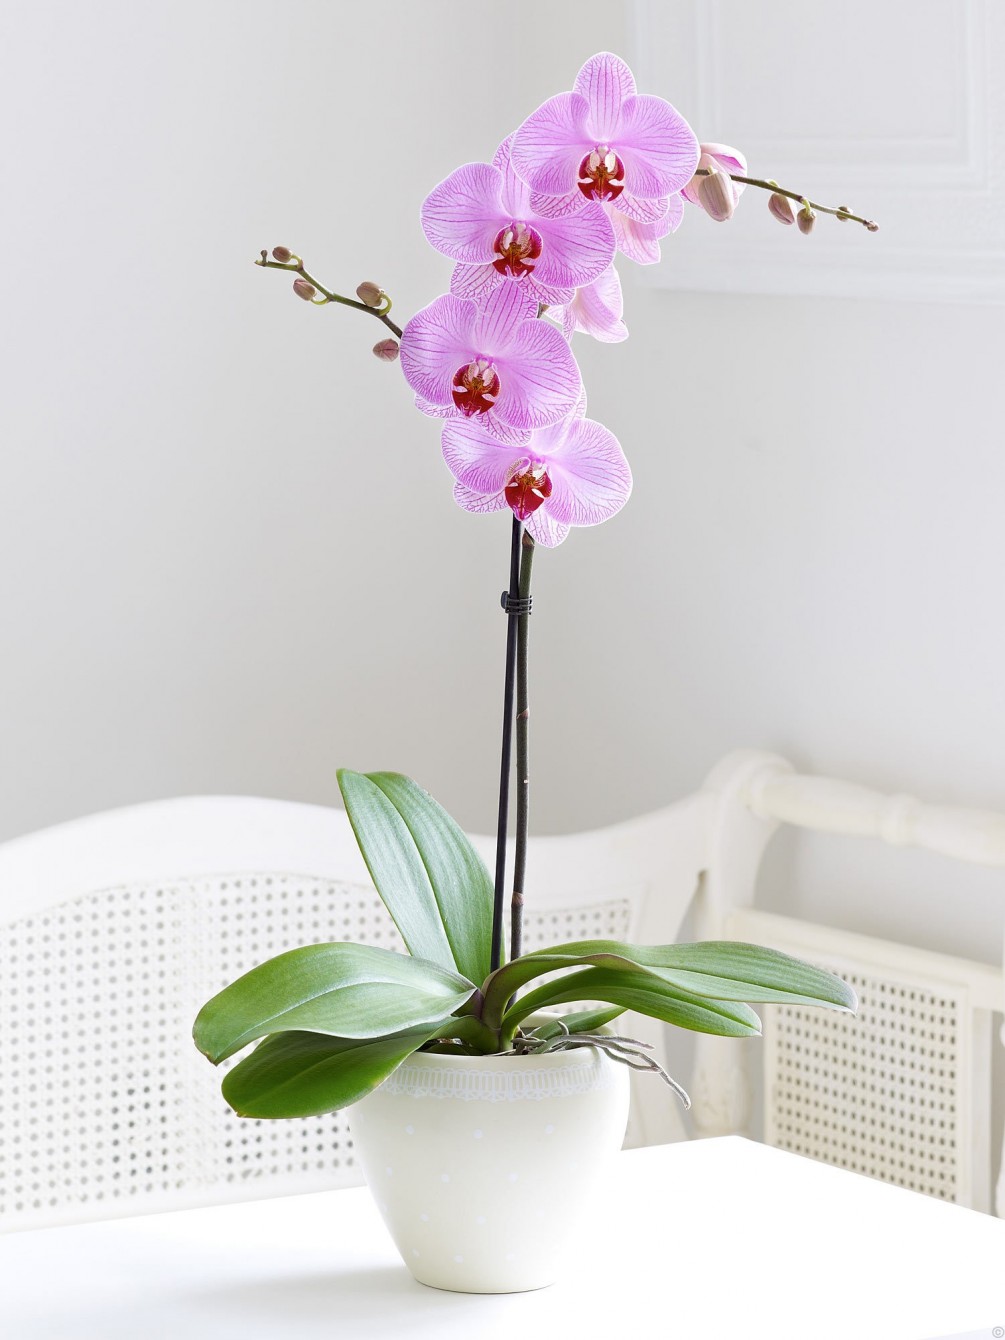 Phalenopsis orchids | Winter Flower Garden Indoors: Blooming Plants to Grow In the House during Cold Weather Months | FarmFoodFamily.com